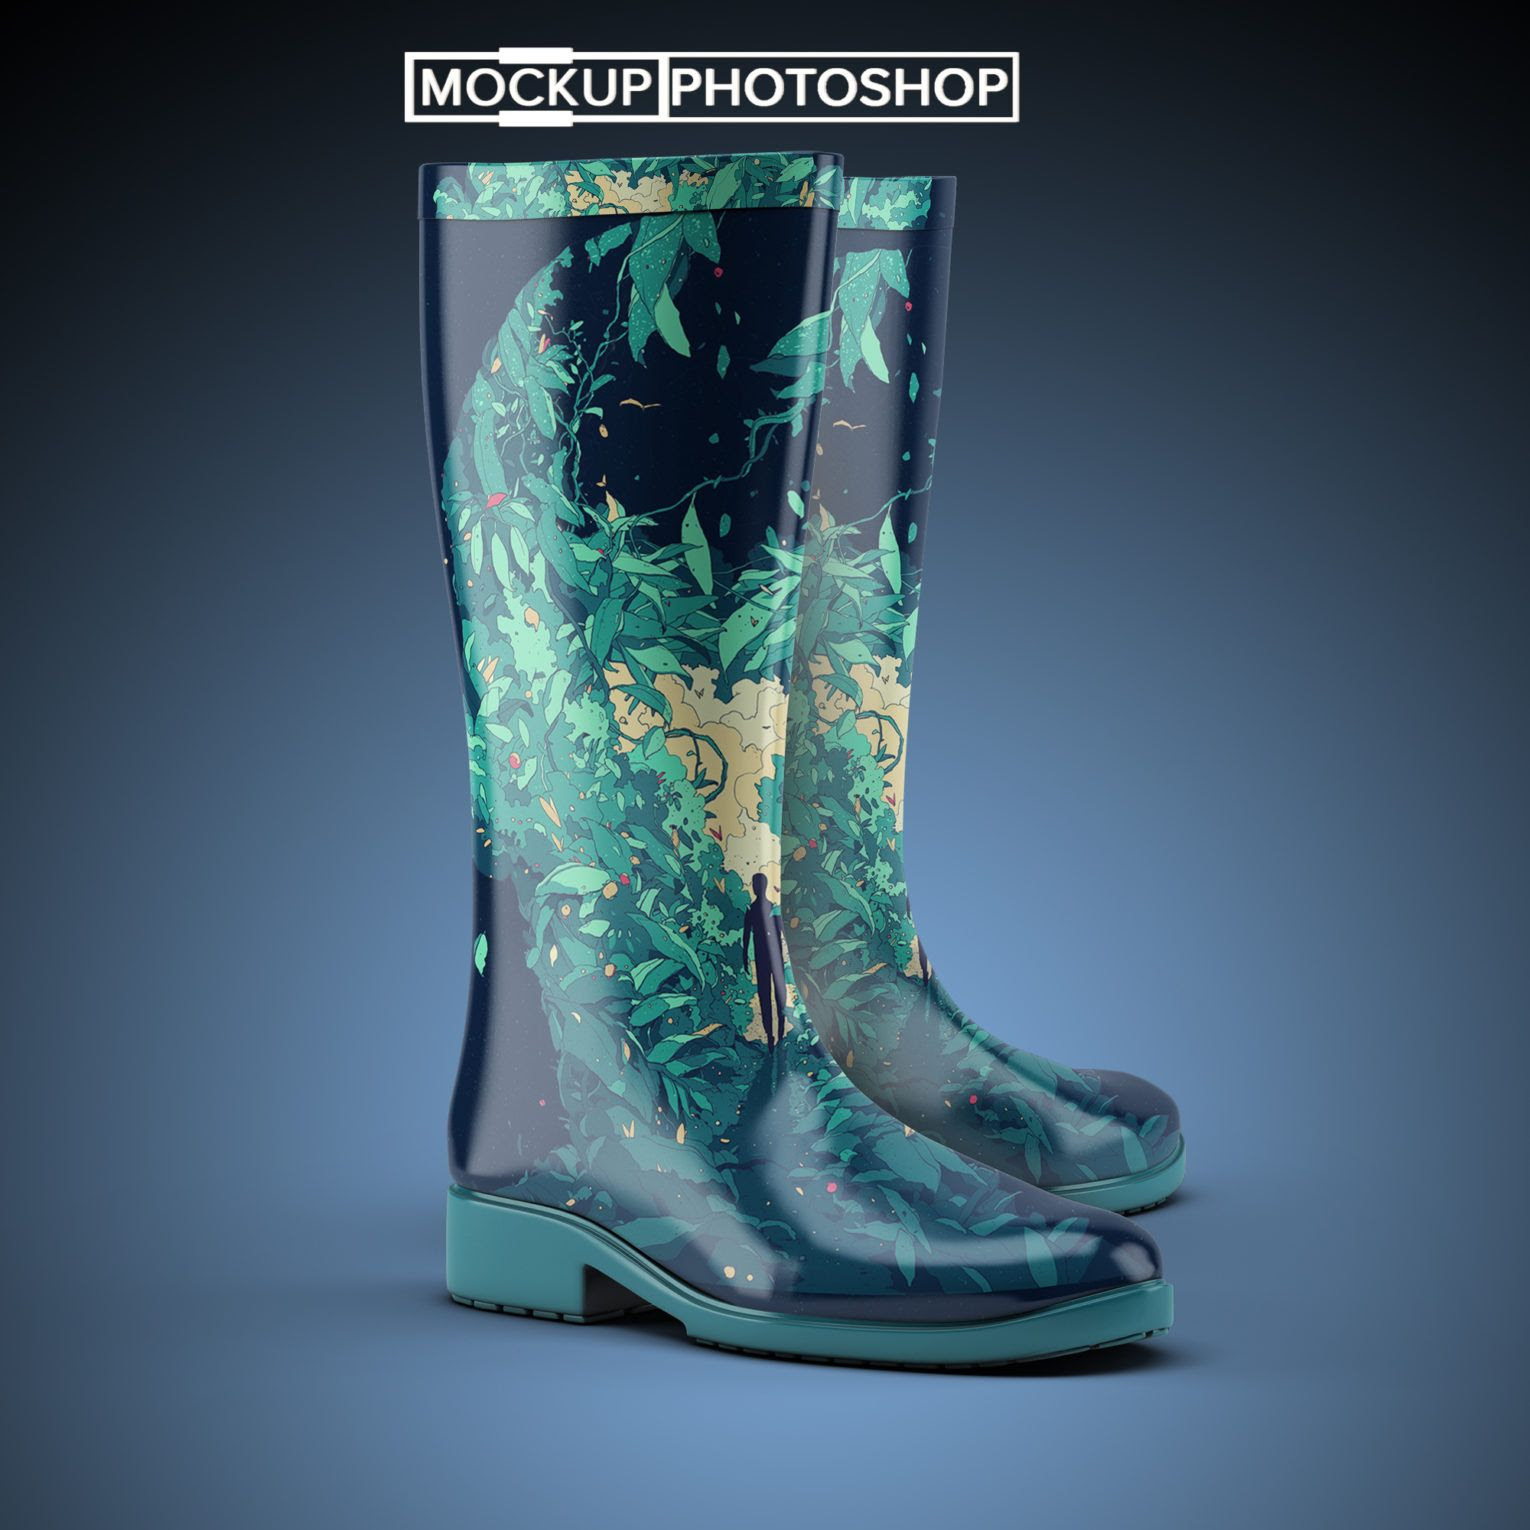 Download This Free Boot PSD Mockup to Create Photorealistic Design